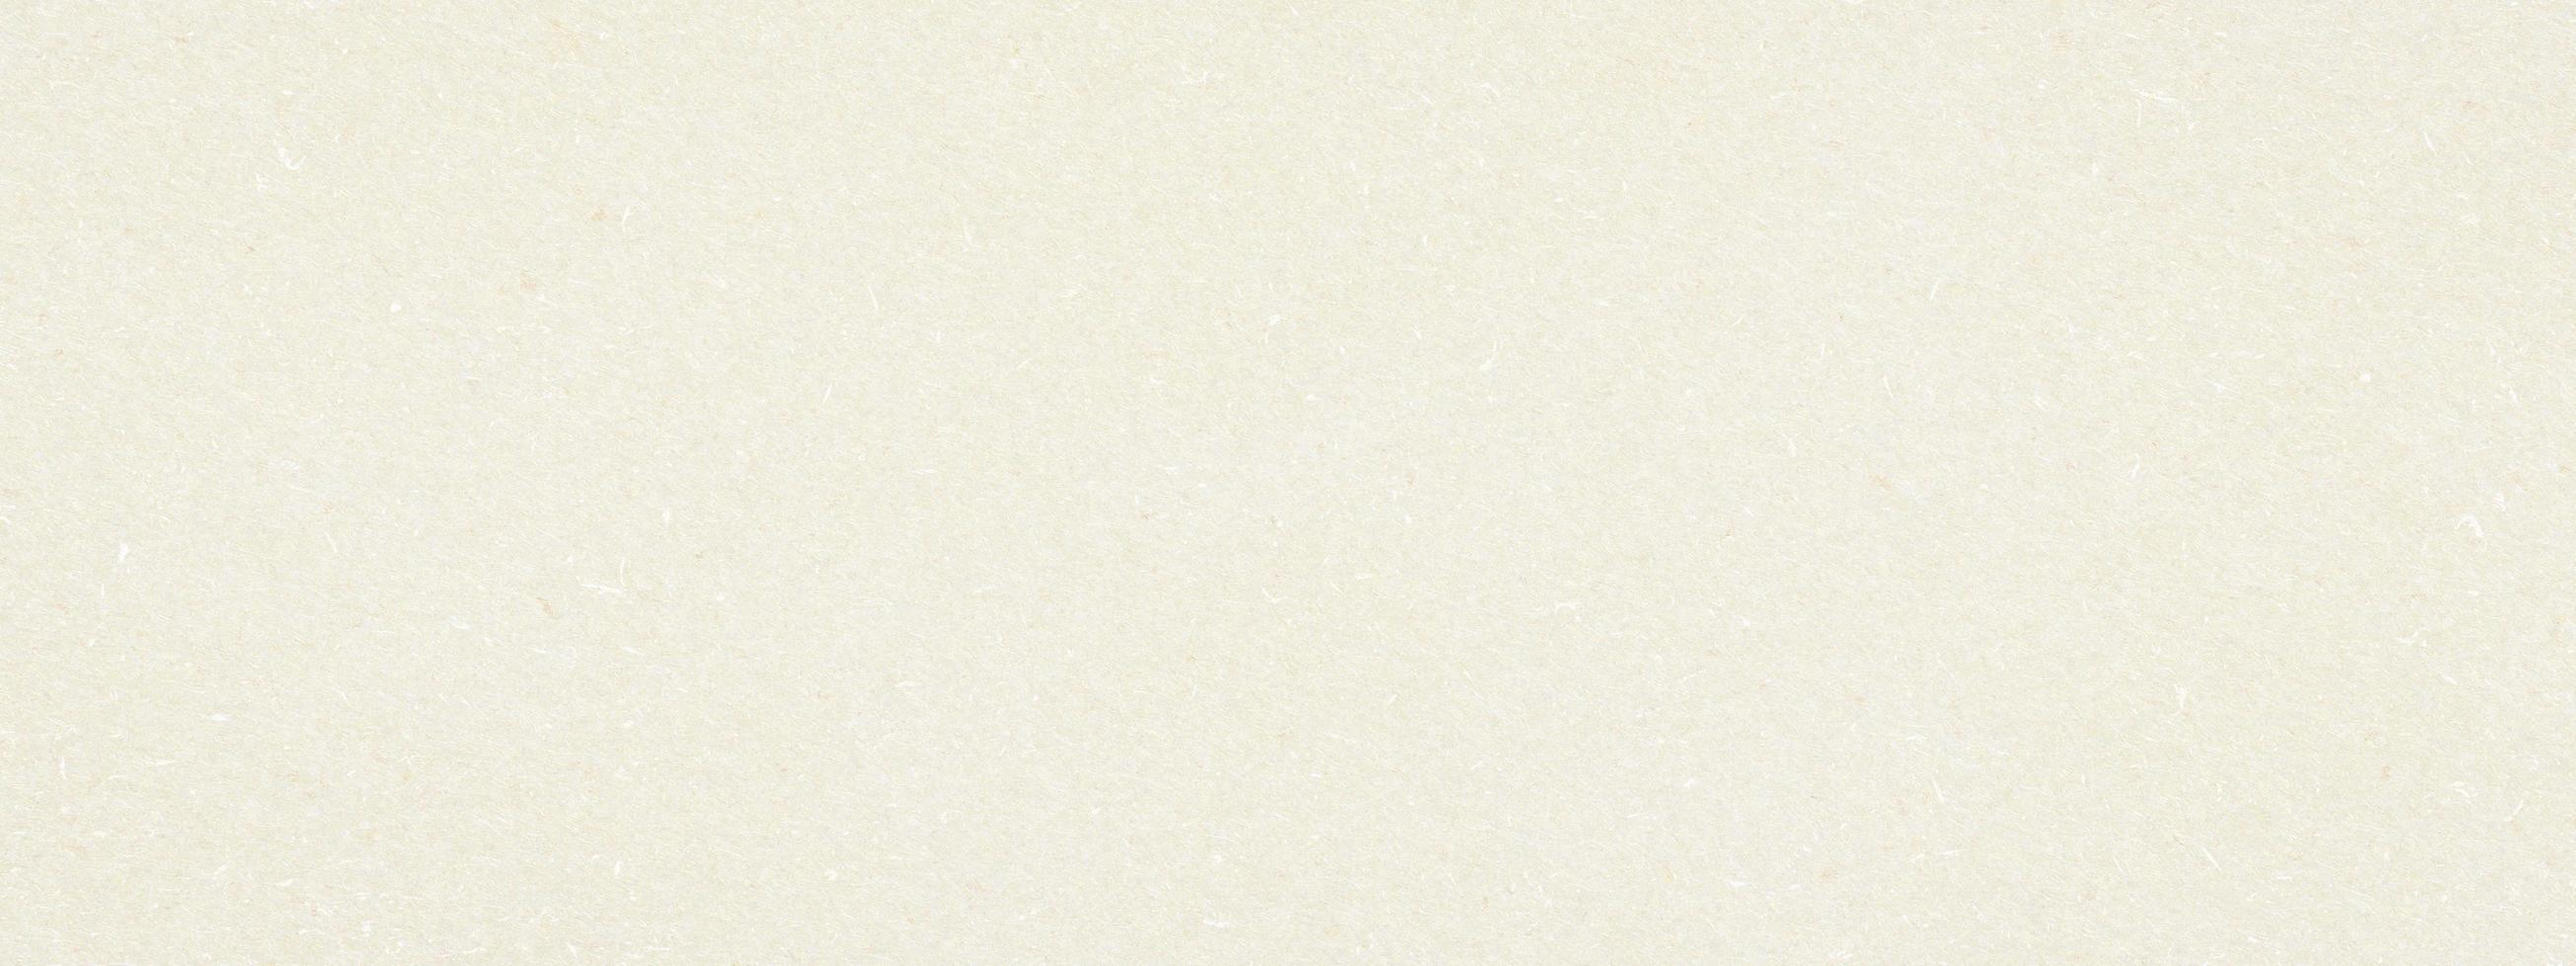 Light beige Paper texture background, kraft paper horizontal with Unique  design, Soft natural paper style For aesthetic creative design 4876219  Stock Photo at Vecteezy